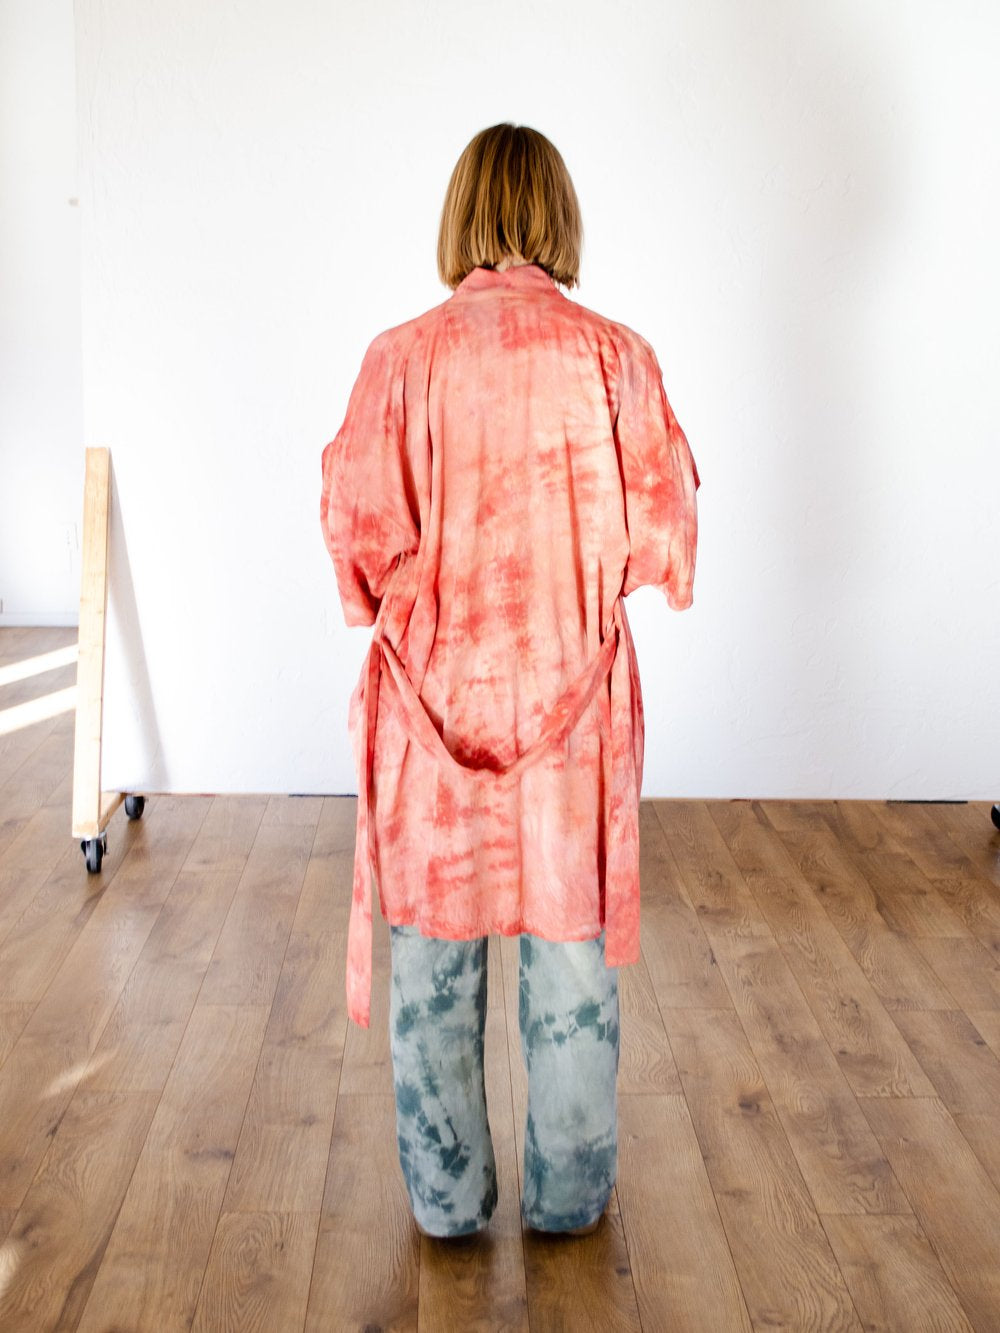 The Luxurious Robe in Bend Sunset Colors - Tie Dye Rayon Robe by 1 Life